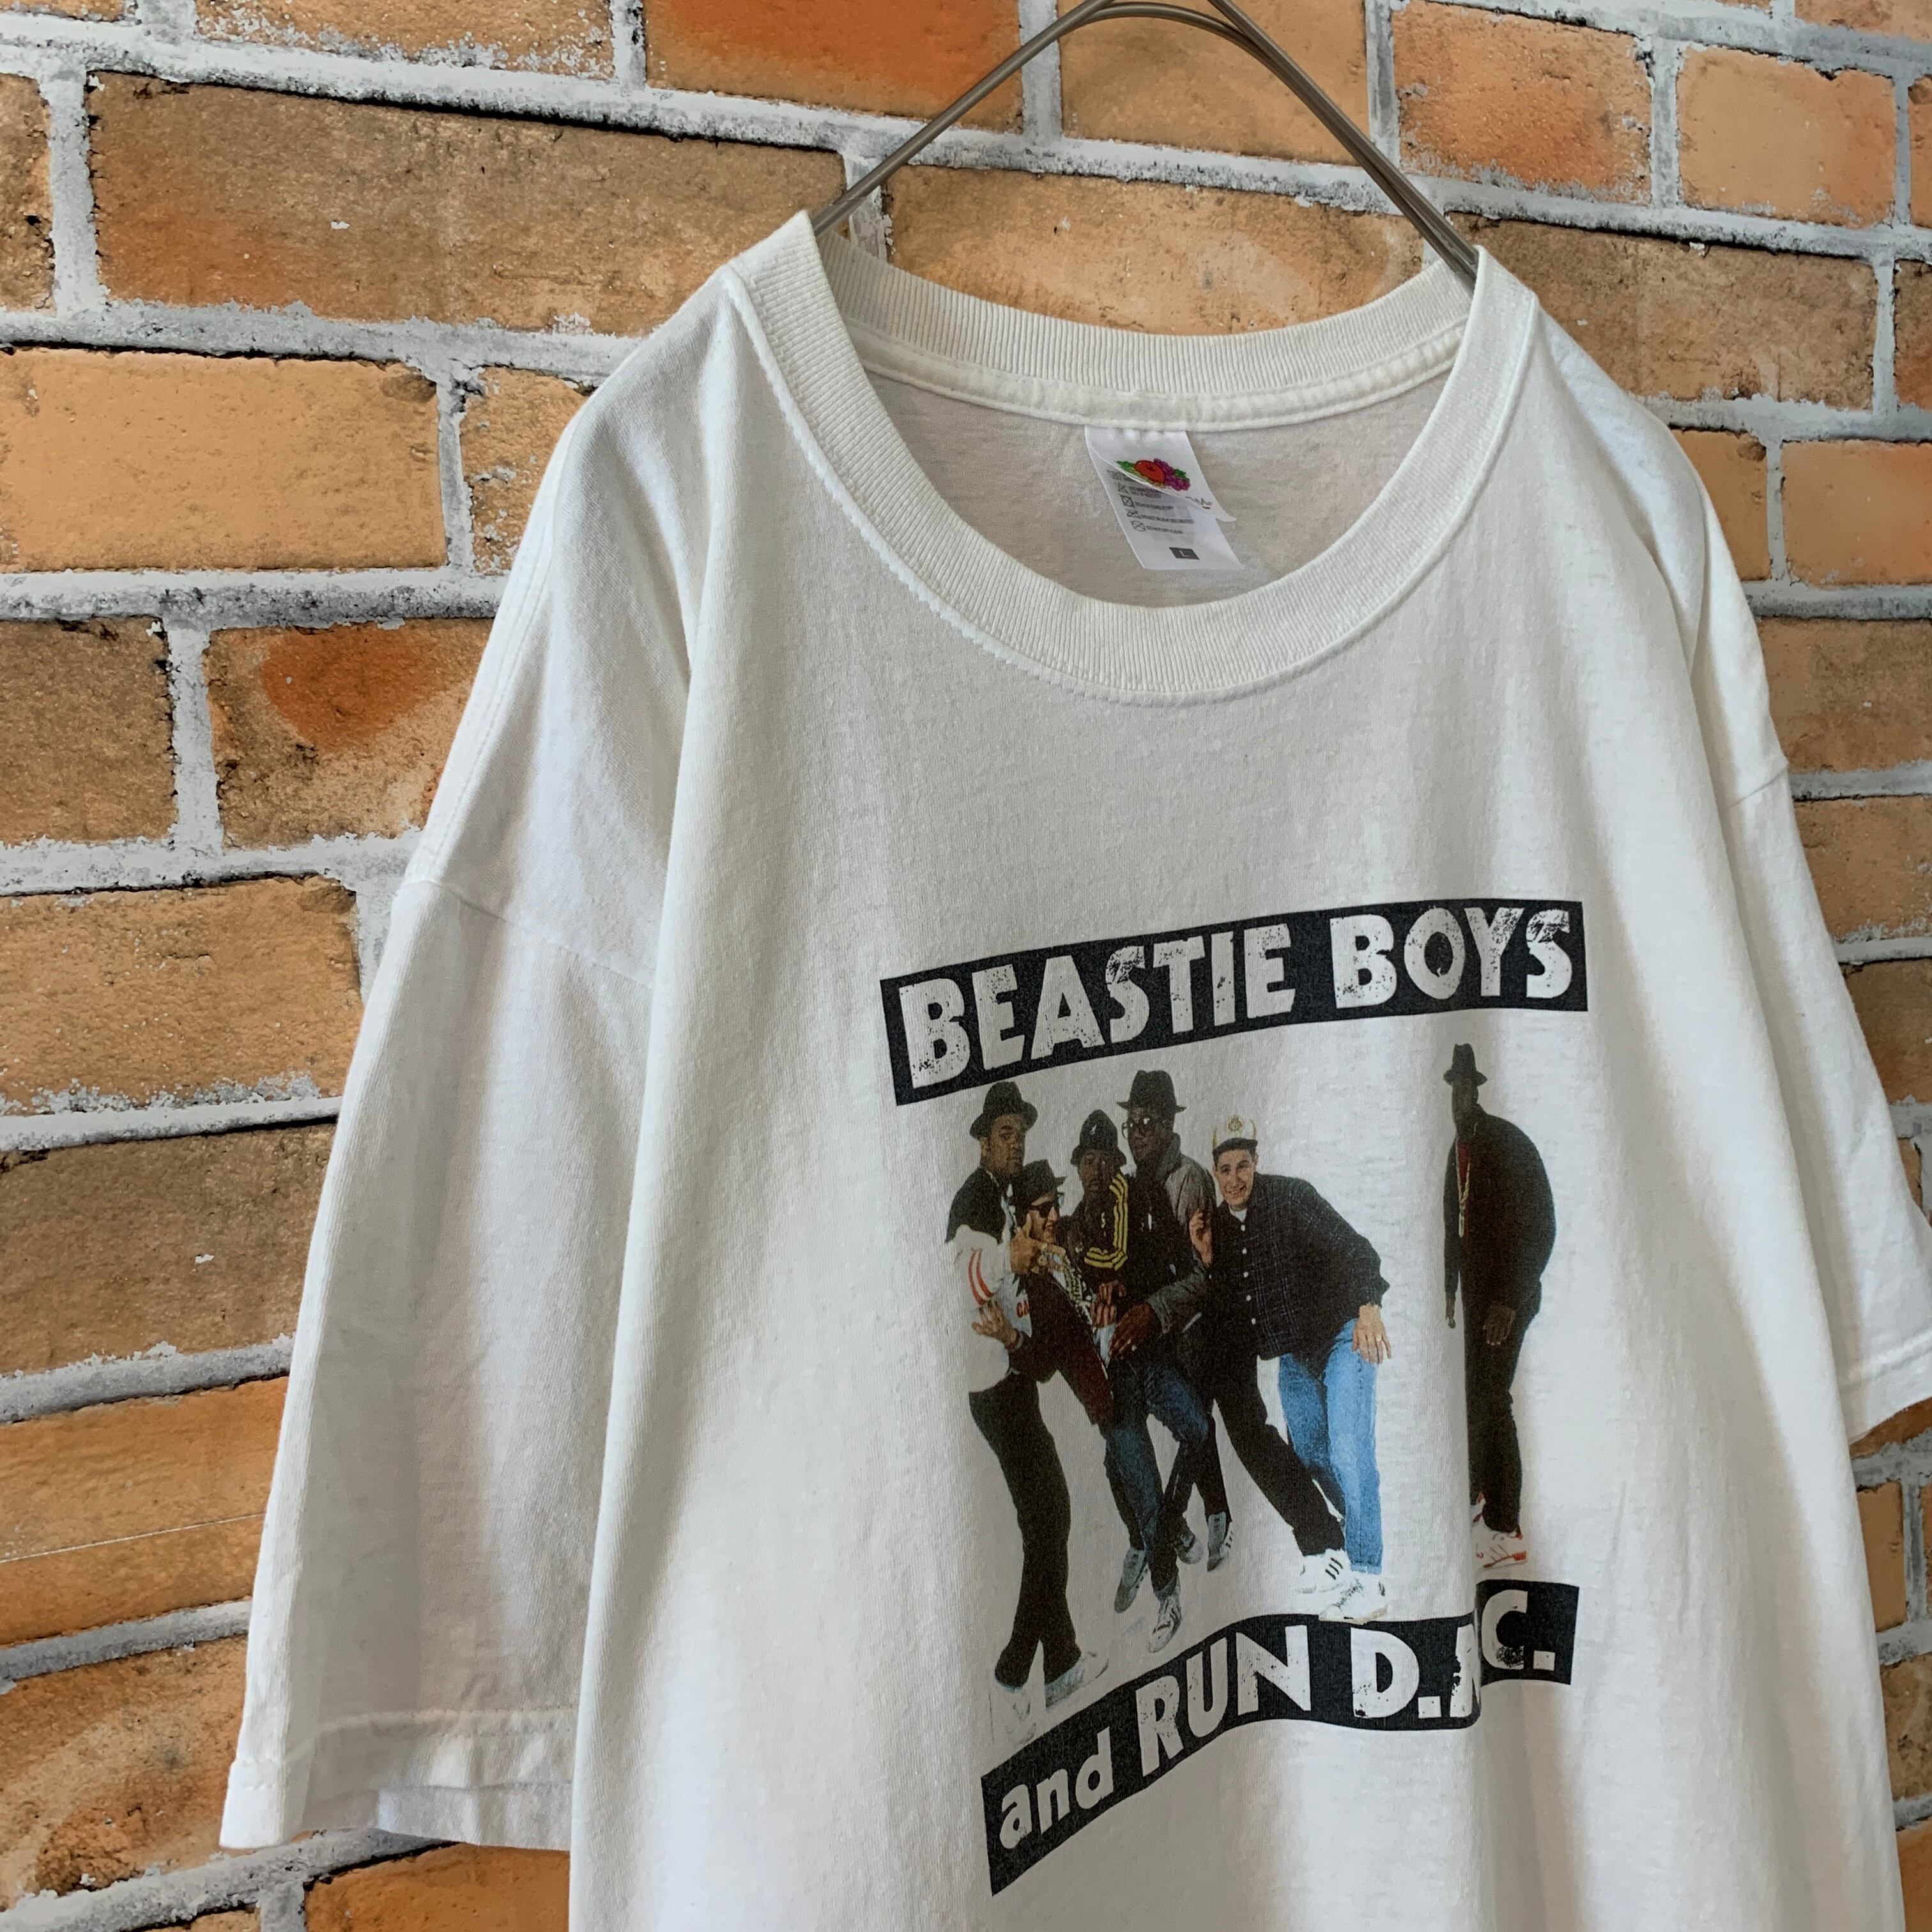 FRUIT OF THE LOOM】Beastie Boys and RUN D.M.C. Tシャツ Large